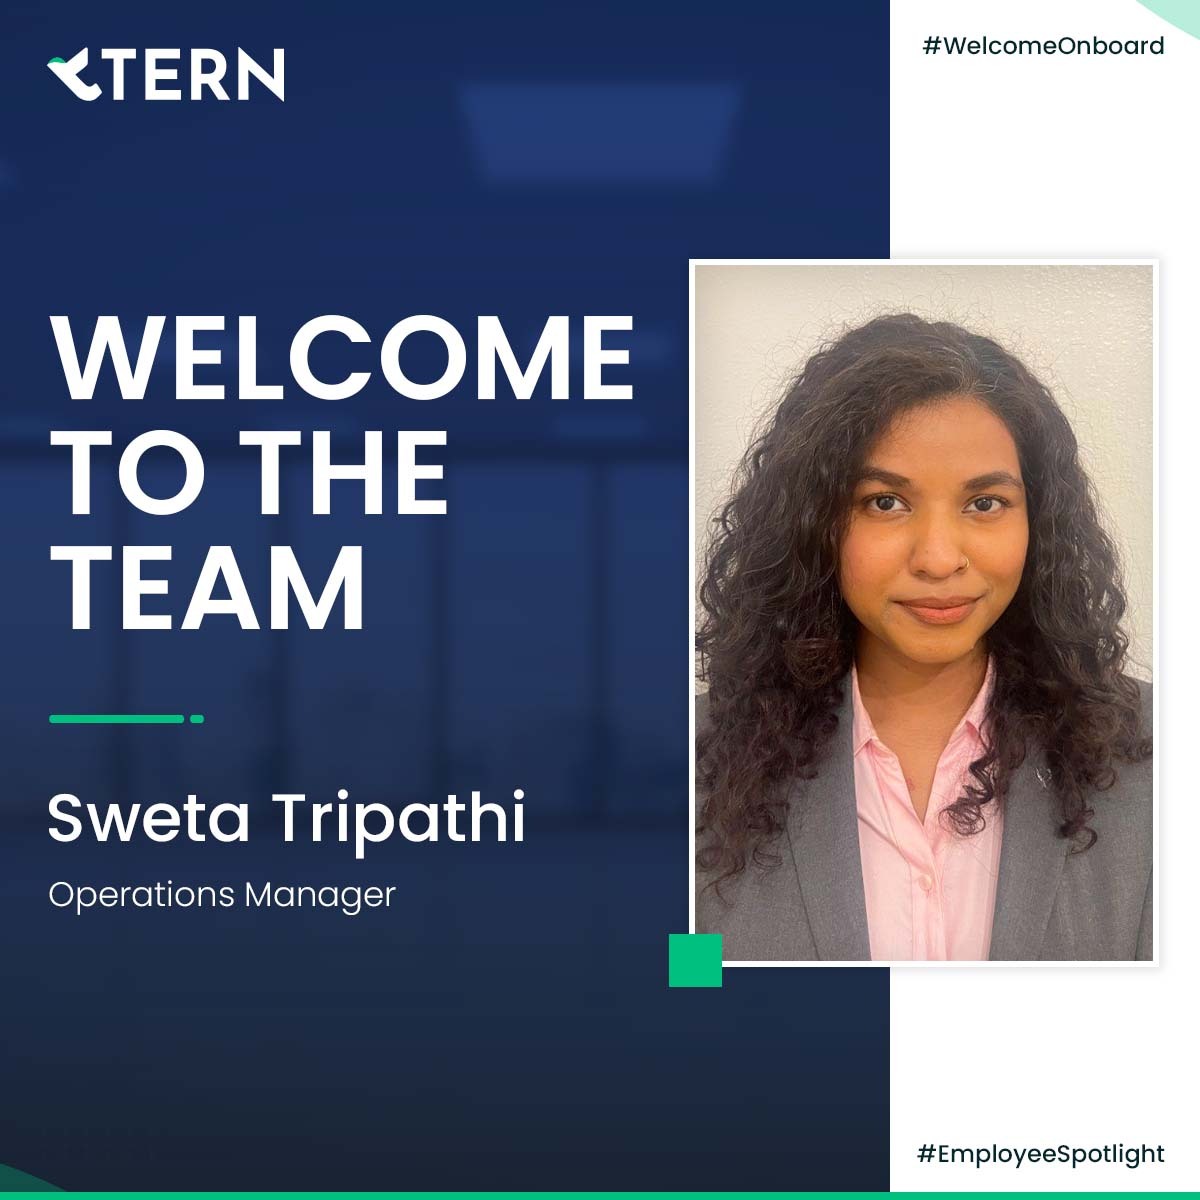 We are excited to welcome Sweta Tripathi, our Operations Manager at TERN Group!

In her current role at TERN, Sweta envisions transforming the company into a haven for immigrants seeking a better life.

Welcome aboard, Sweta! We're thrilled to have you with us!

#WelcomeToTheTeam